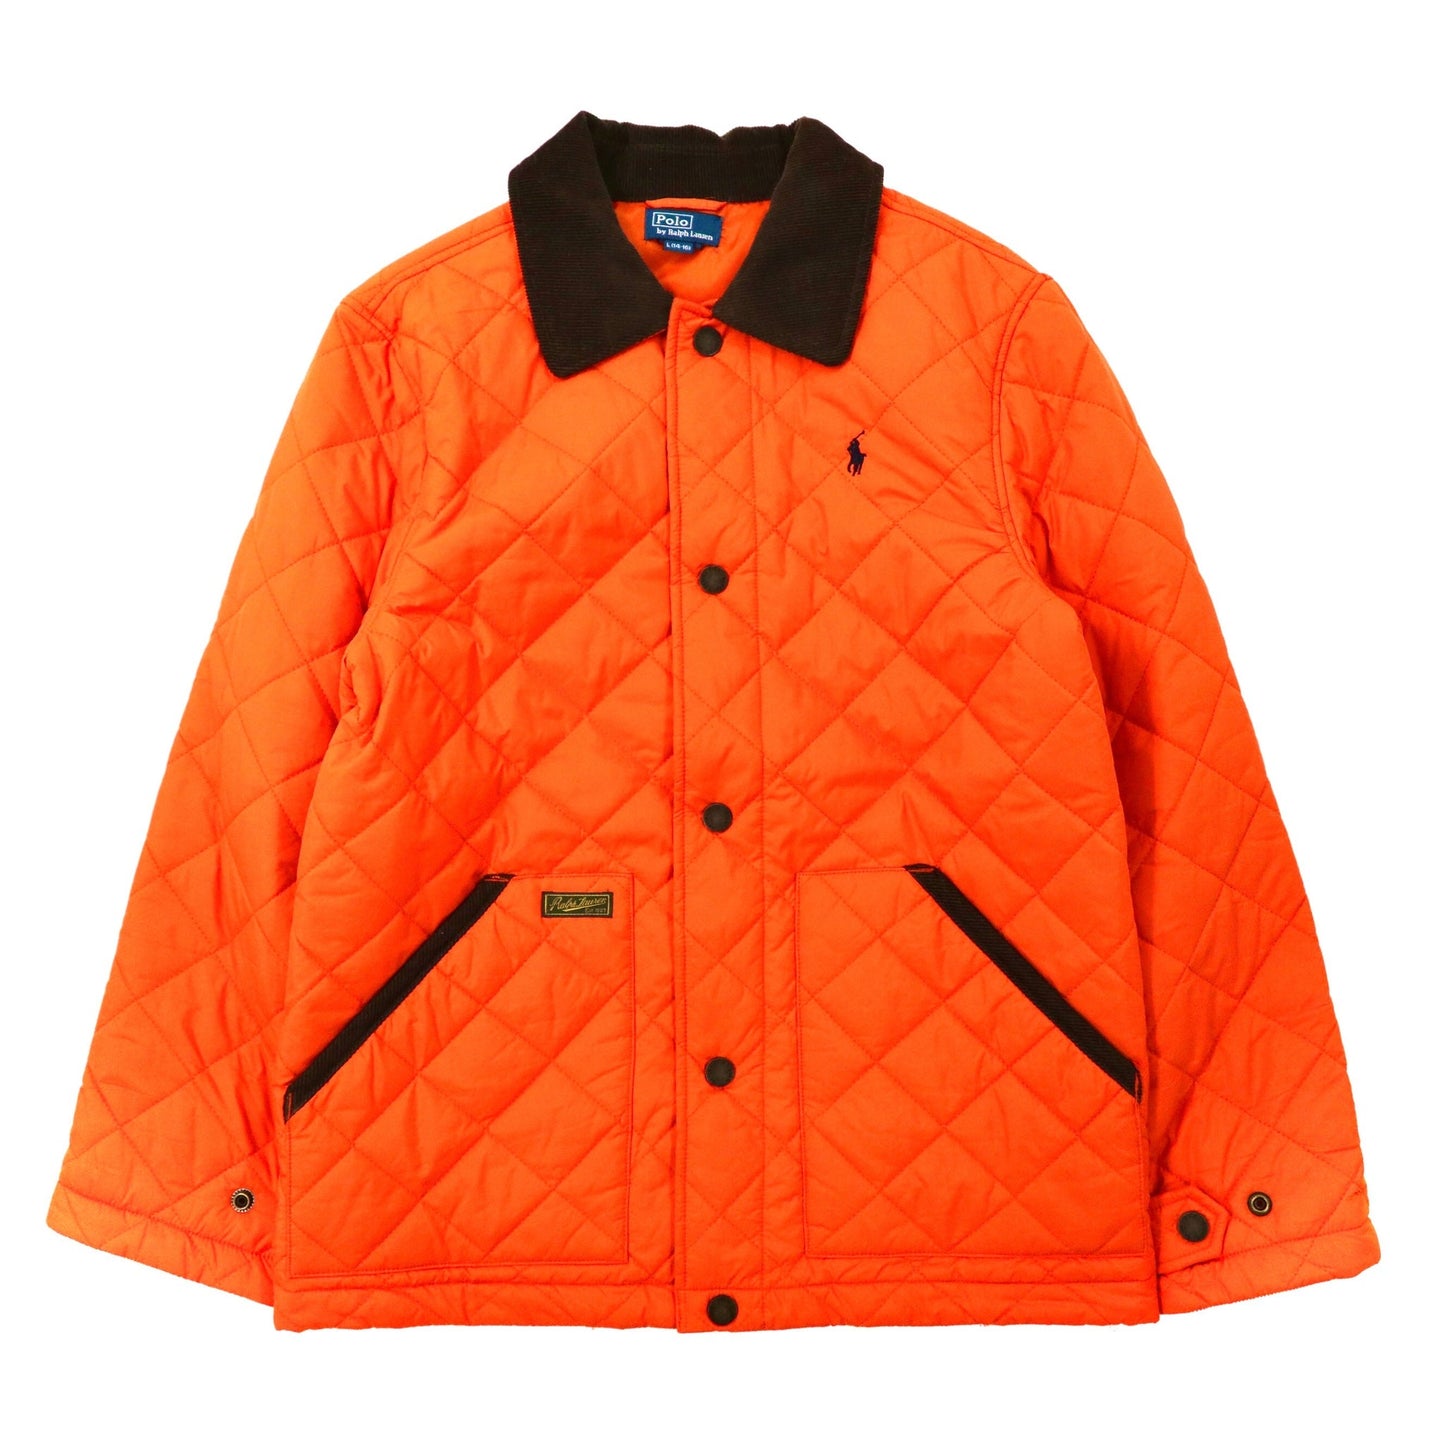 POLO BY RALPH LAUREN QUILTED JACKET L Orange Corduroy Collar